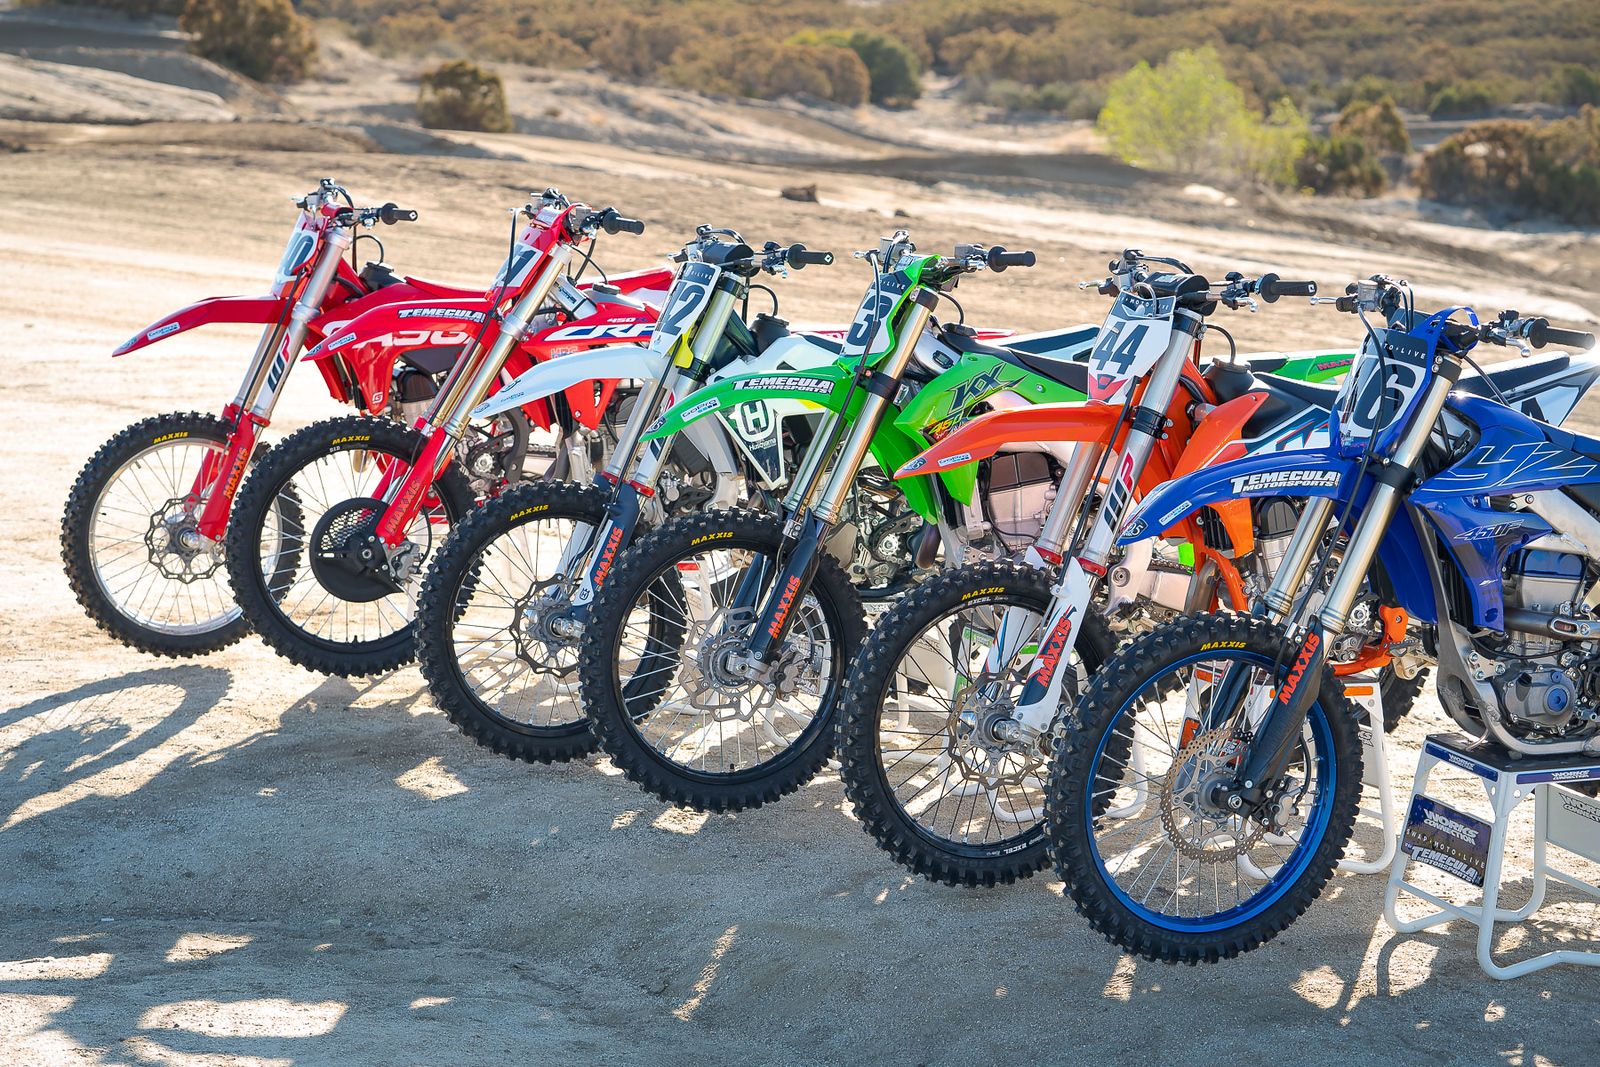 MXA'S WEEKEND NEWS ROUND-UP: ALL THE 2023 MOTOCROSS BIKES IN ONE PLACE -  Motocross Action Magazine